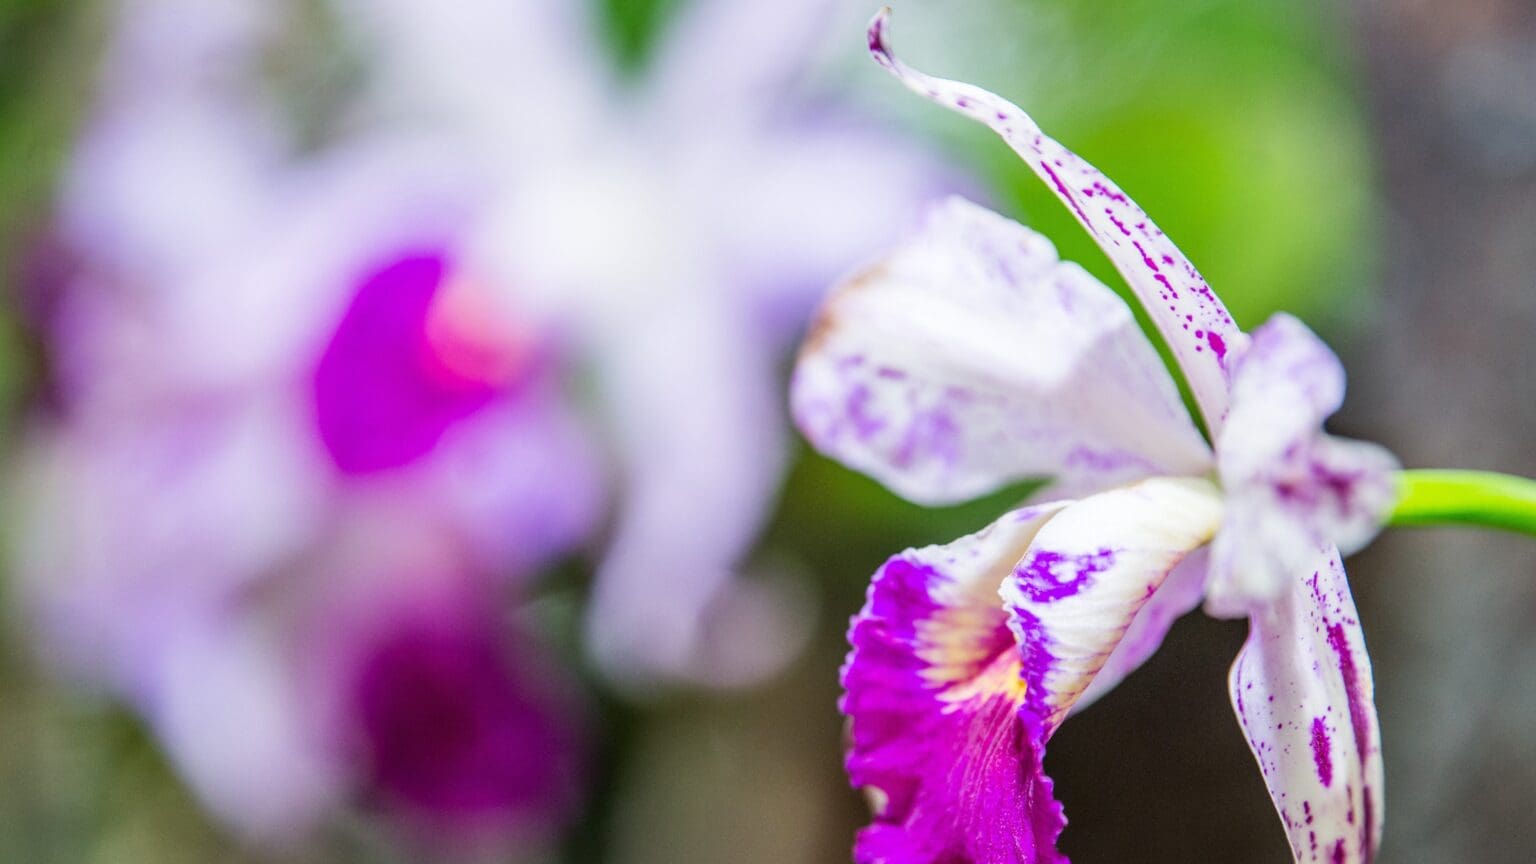 Thematic Walks Showcase Blooming Orchids at the University of Szeged‘s Botanical Garden